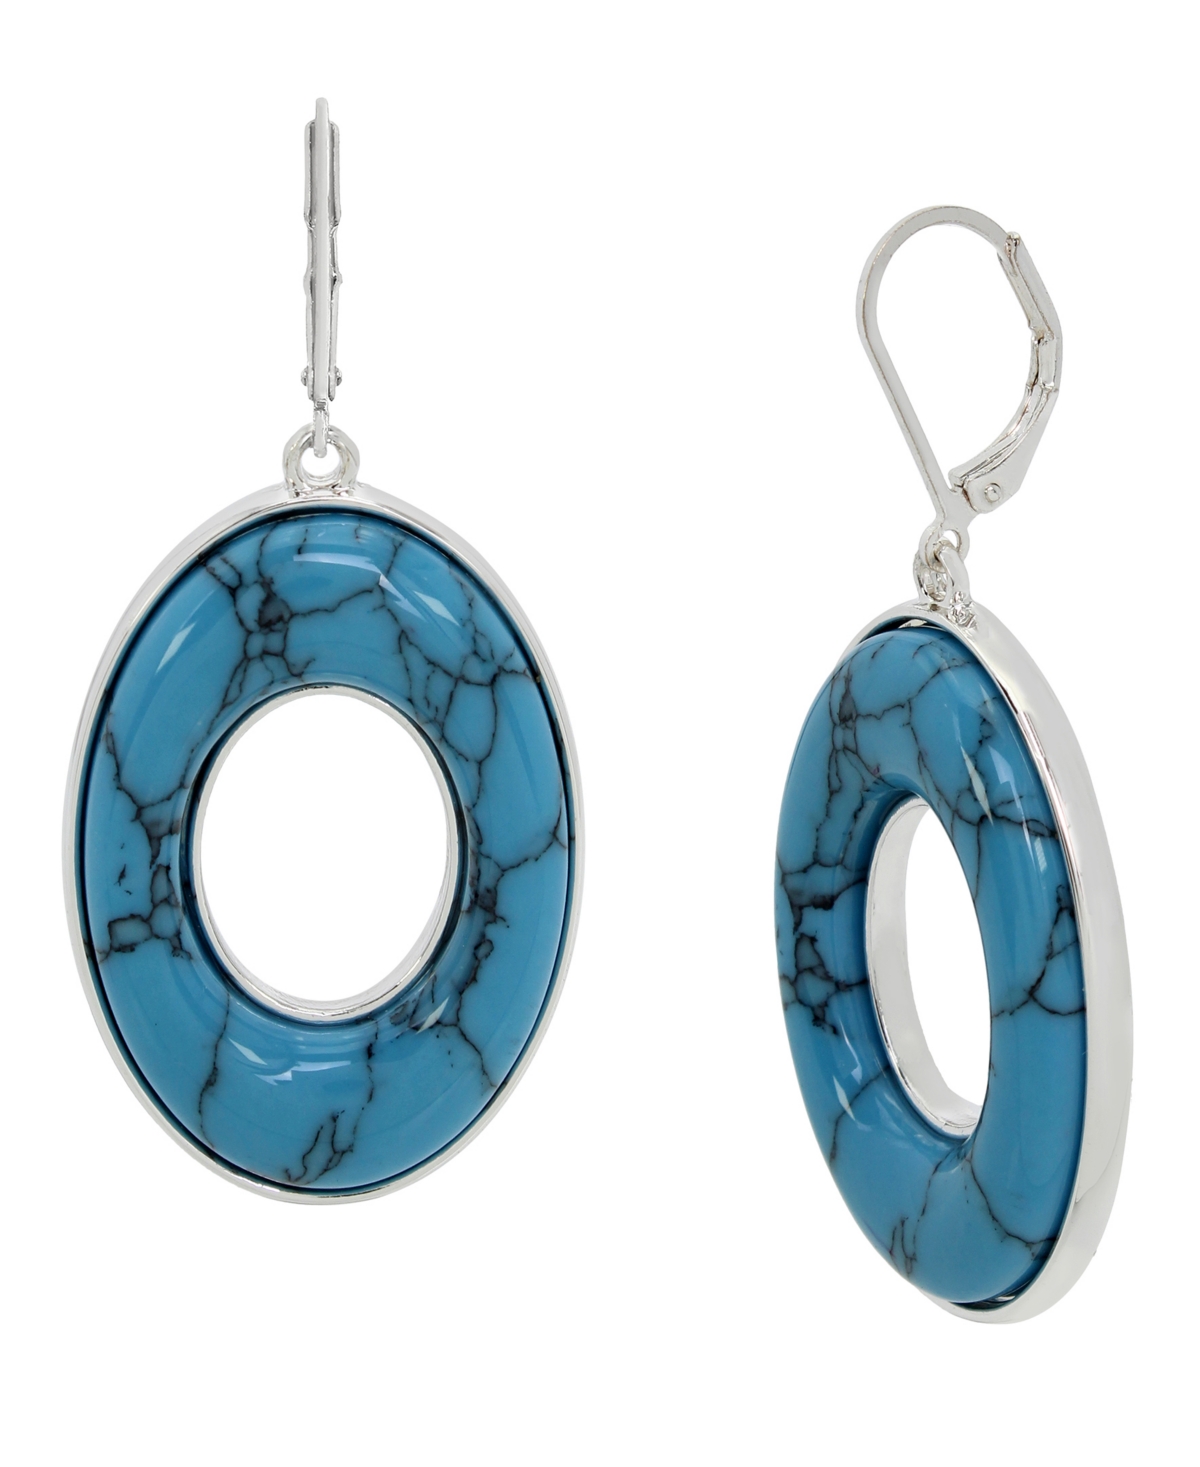 Semi-Precious Turquoise Drop Earrings - Turquoise, Silver